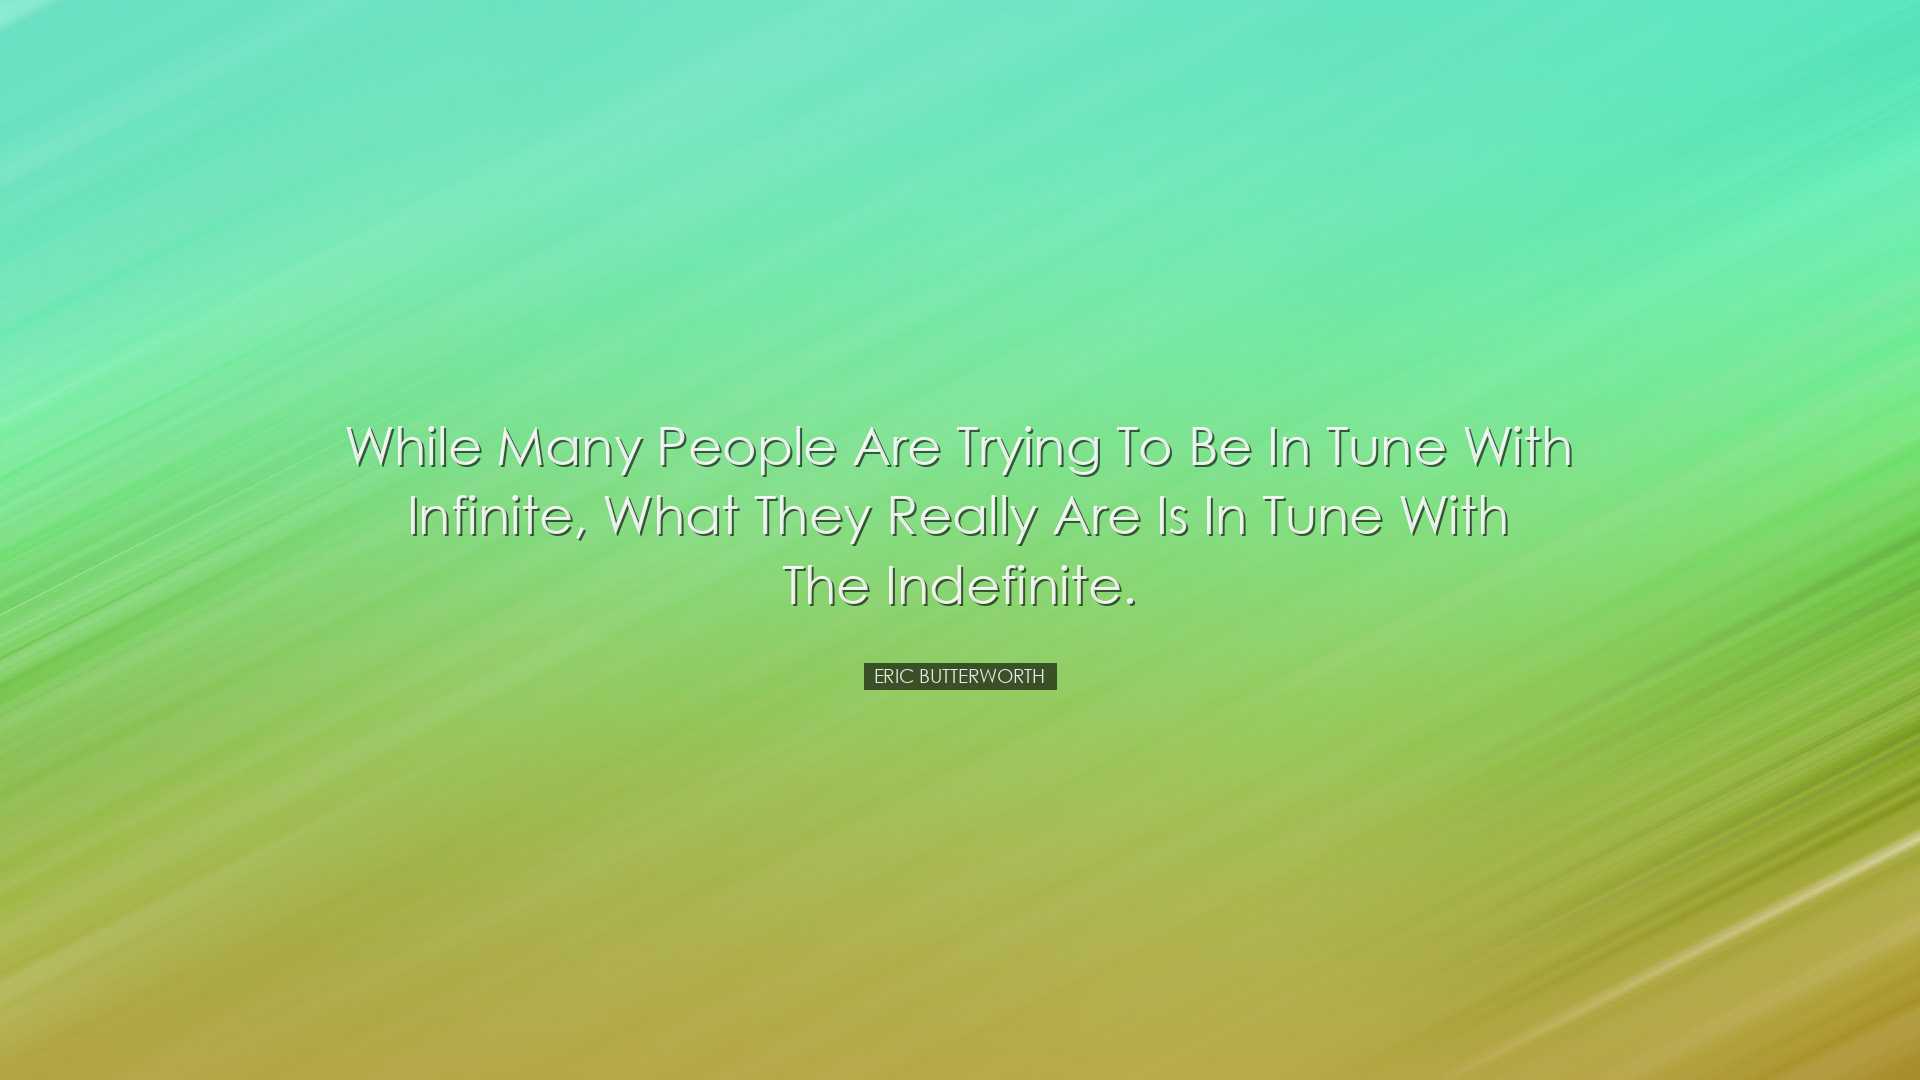 While many people are trying to be in tune with infinite, what the